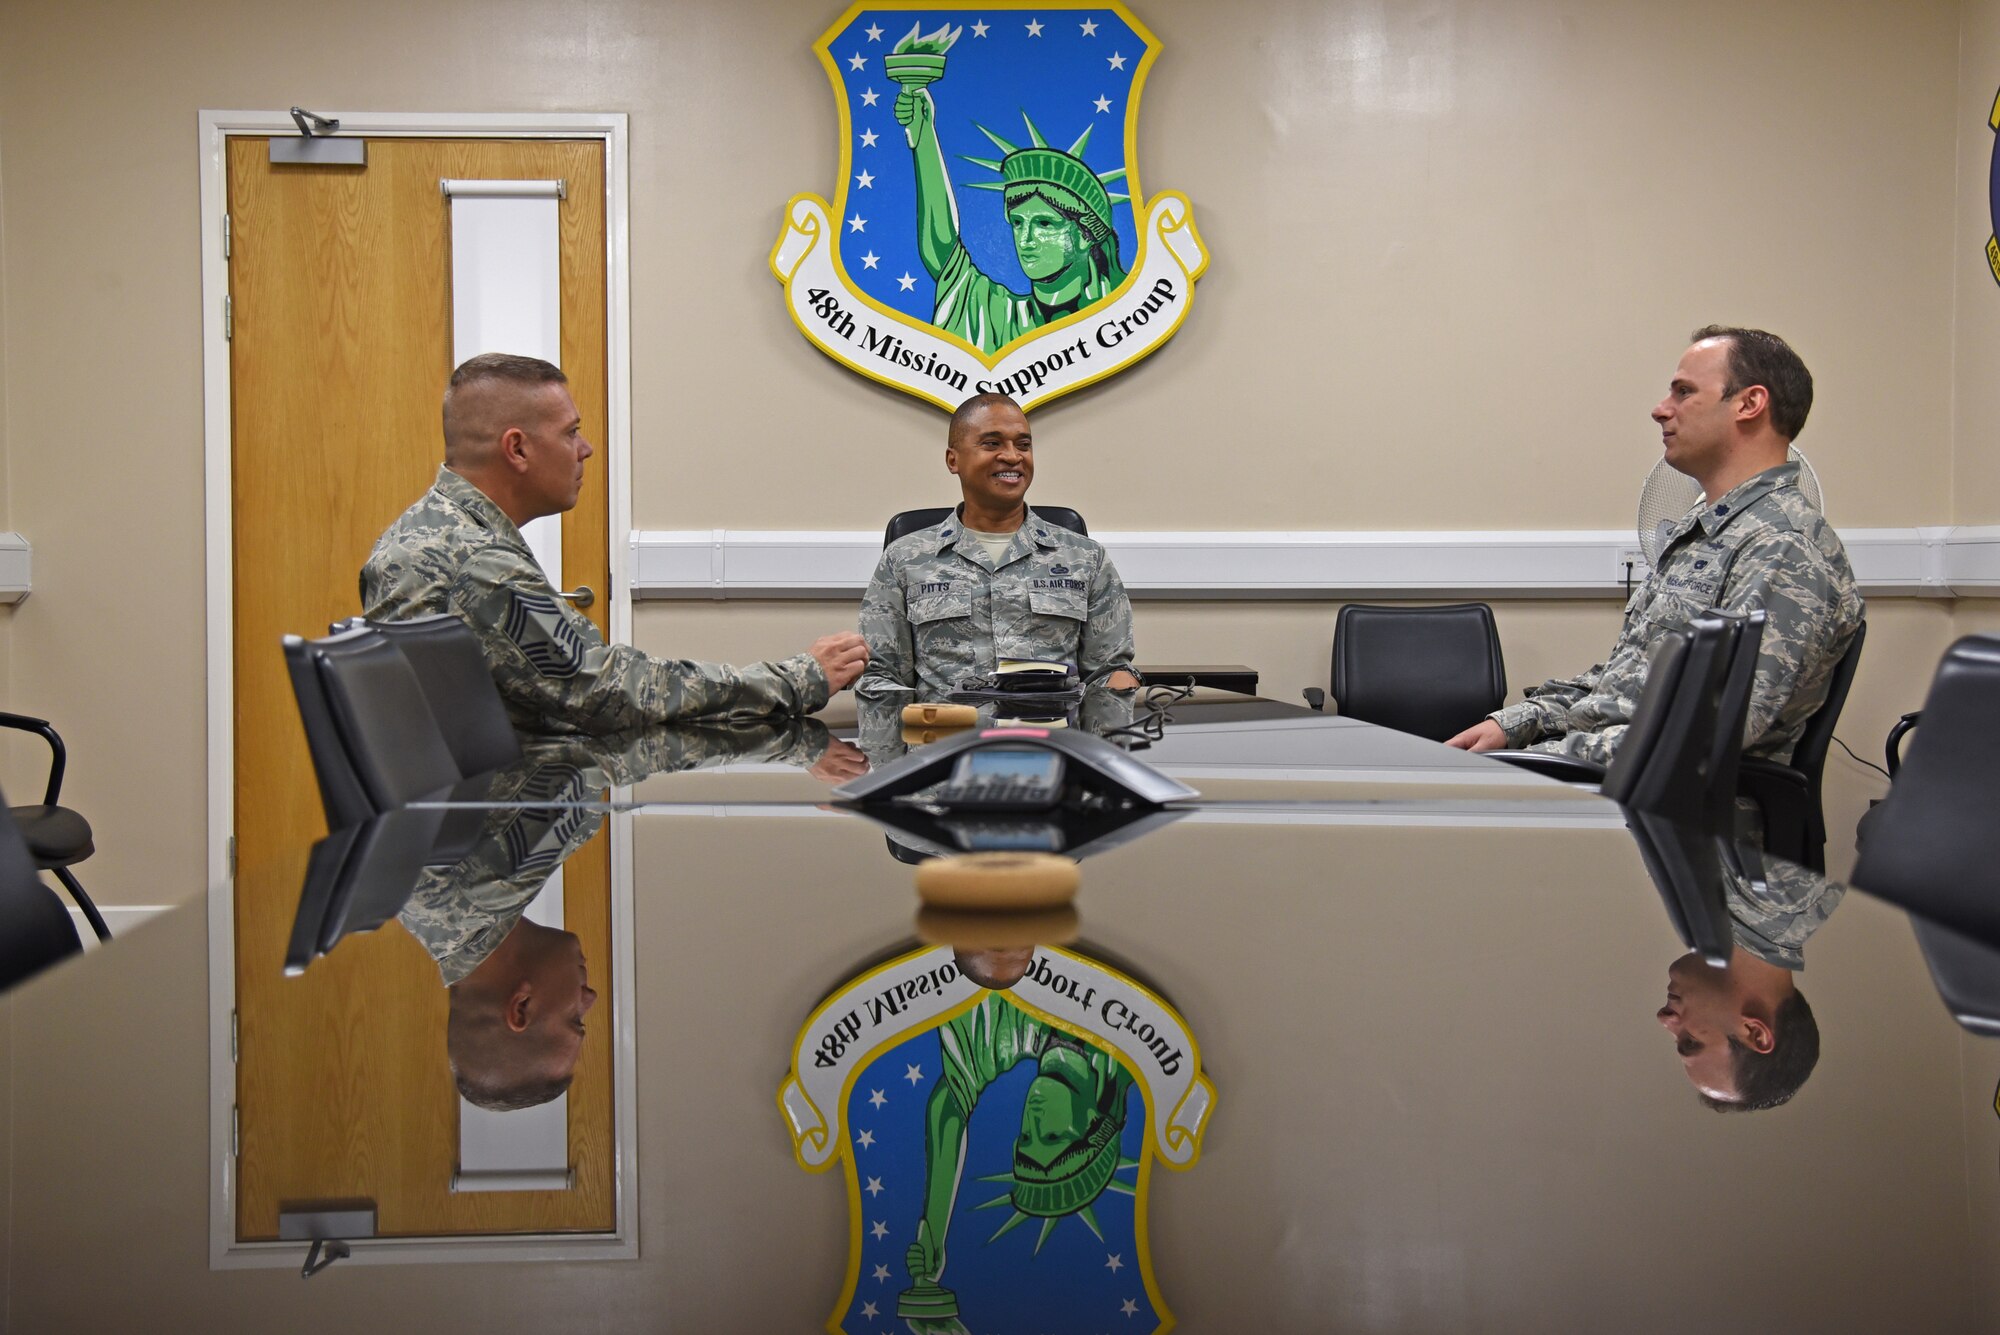 Commanders and enlisted leaders from both the 161st Air Refueling Wing and 48th Fighter Wing meet to talk about overall mission effectiveness during a two-week training exercise hosted at Royal Air Force Lakenheath, England May 31, 2018. The leaders looked at the overall effectiveness of the training exercise and note the positive impacts, as well as possible improvements, to help ensure the success of future missions. (U.S. Air National Guard photo by Staff Sgt. Dillon Davis)